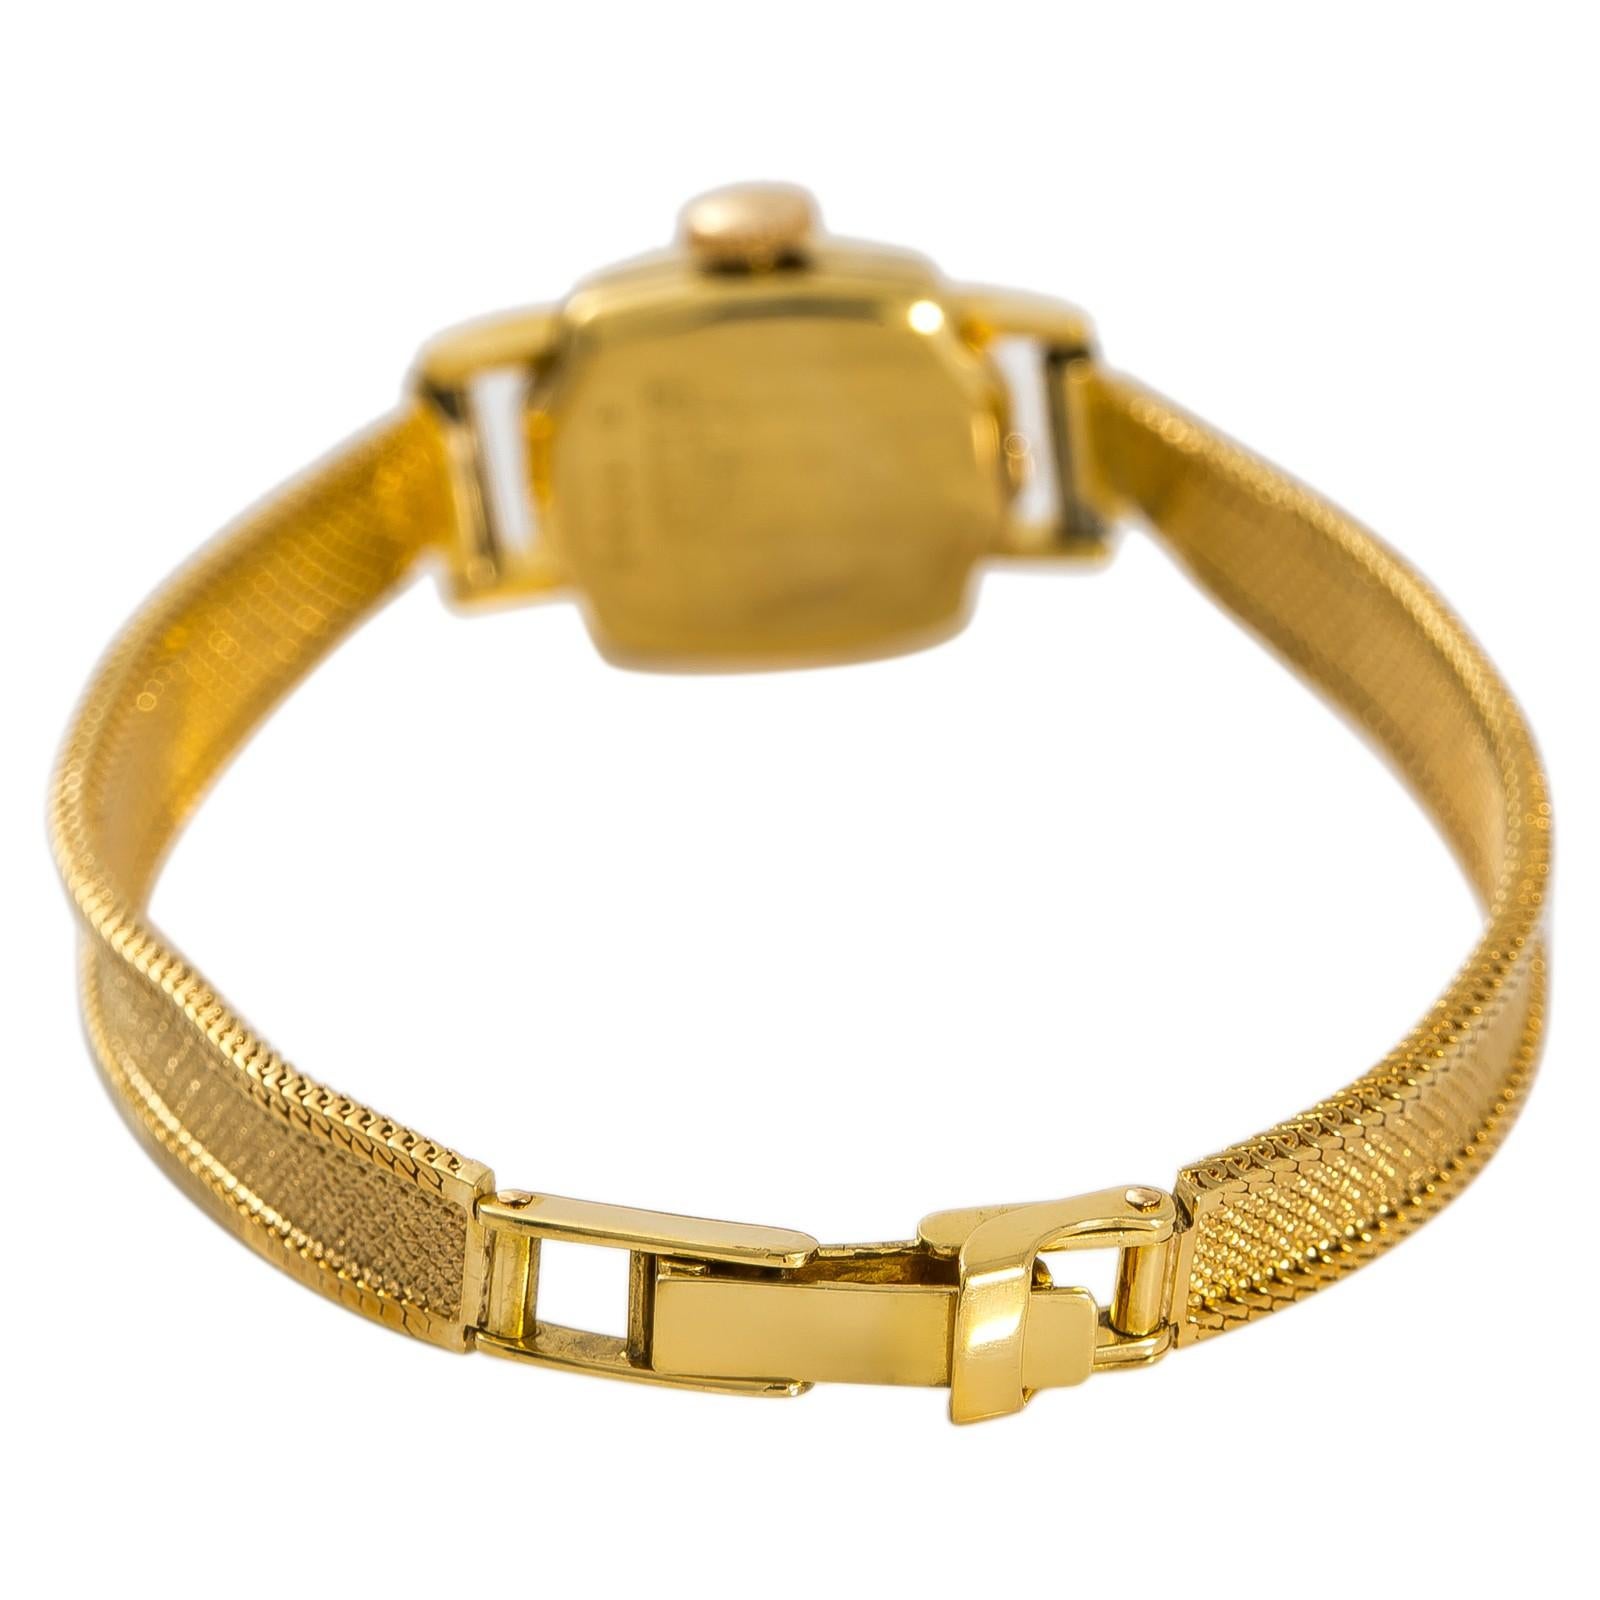 Bucherer 0 Reference #:Unknown. Bucherer Womens Vintage Hand Winding Watch Silver Dial 18K Yellow Gold 14mm. Verified and Certified by WatchFacts. 1 year warranty offered by WatchFacts.
